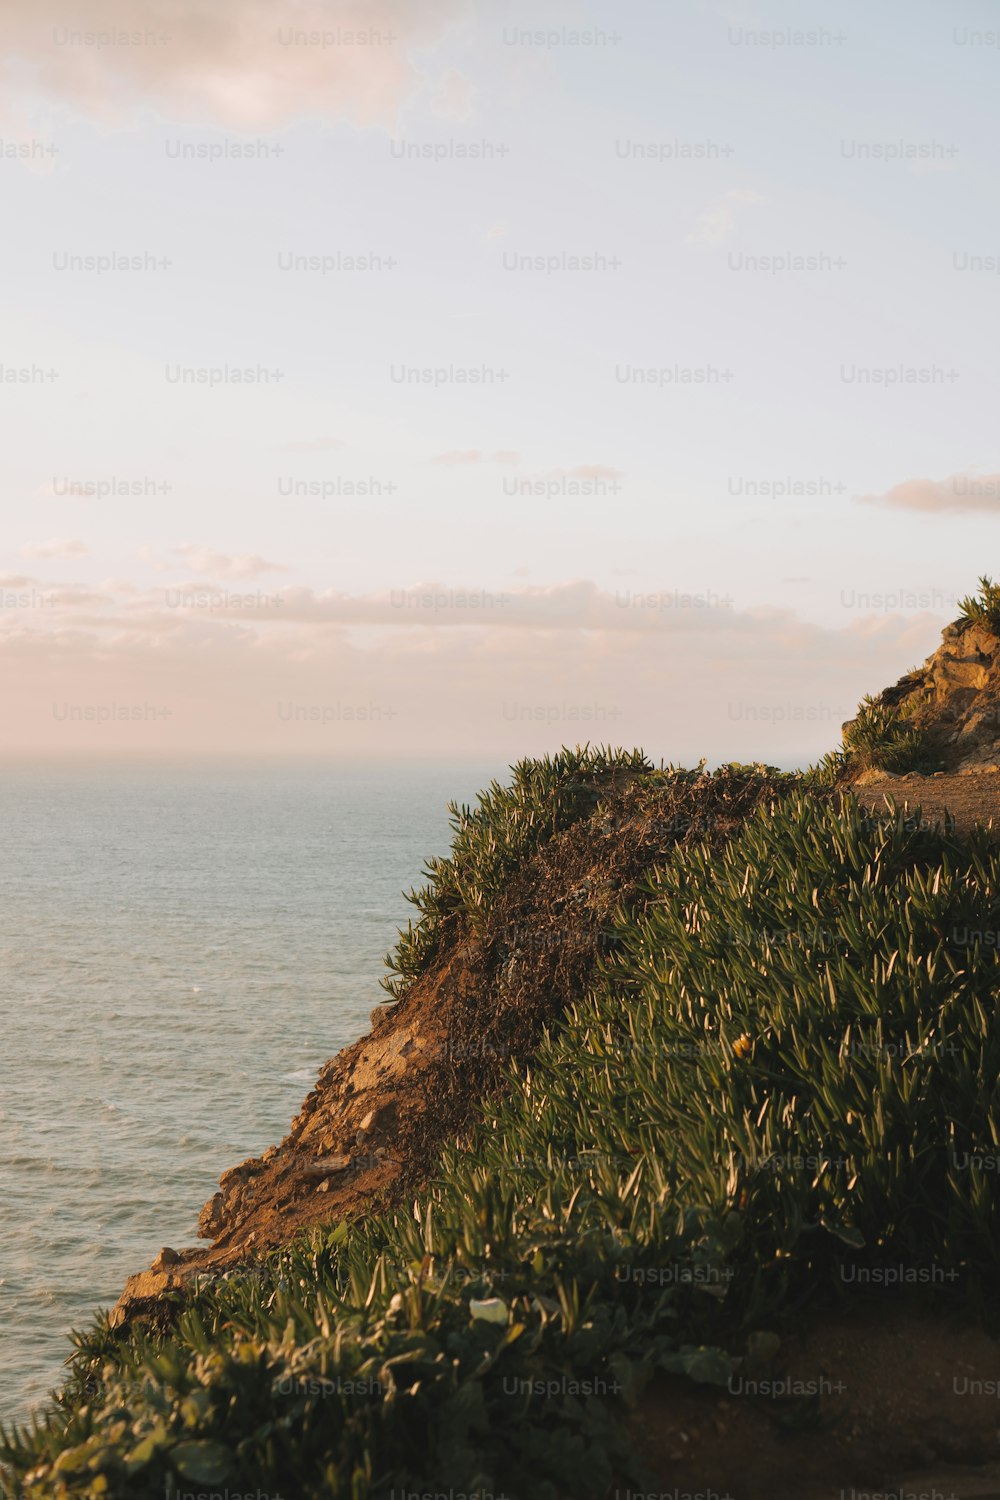 a bench sitting on the side of a cliff overlooking the ocean